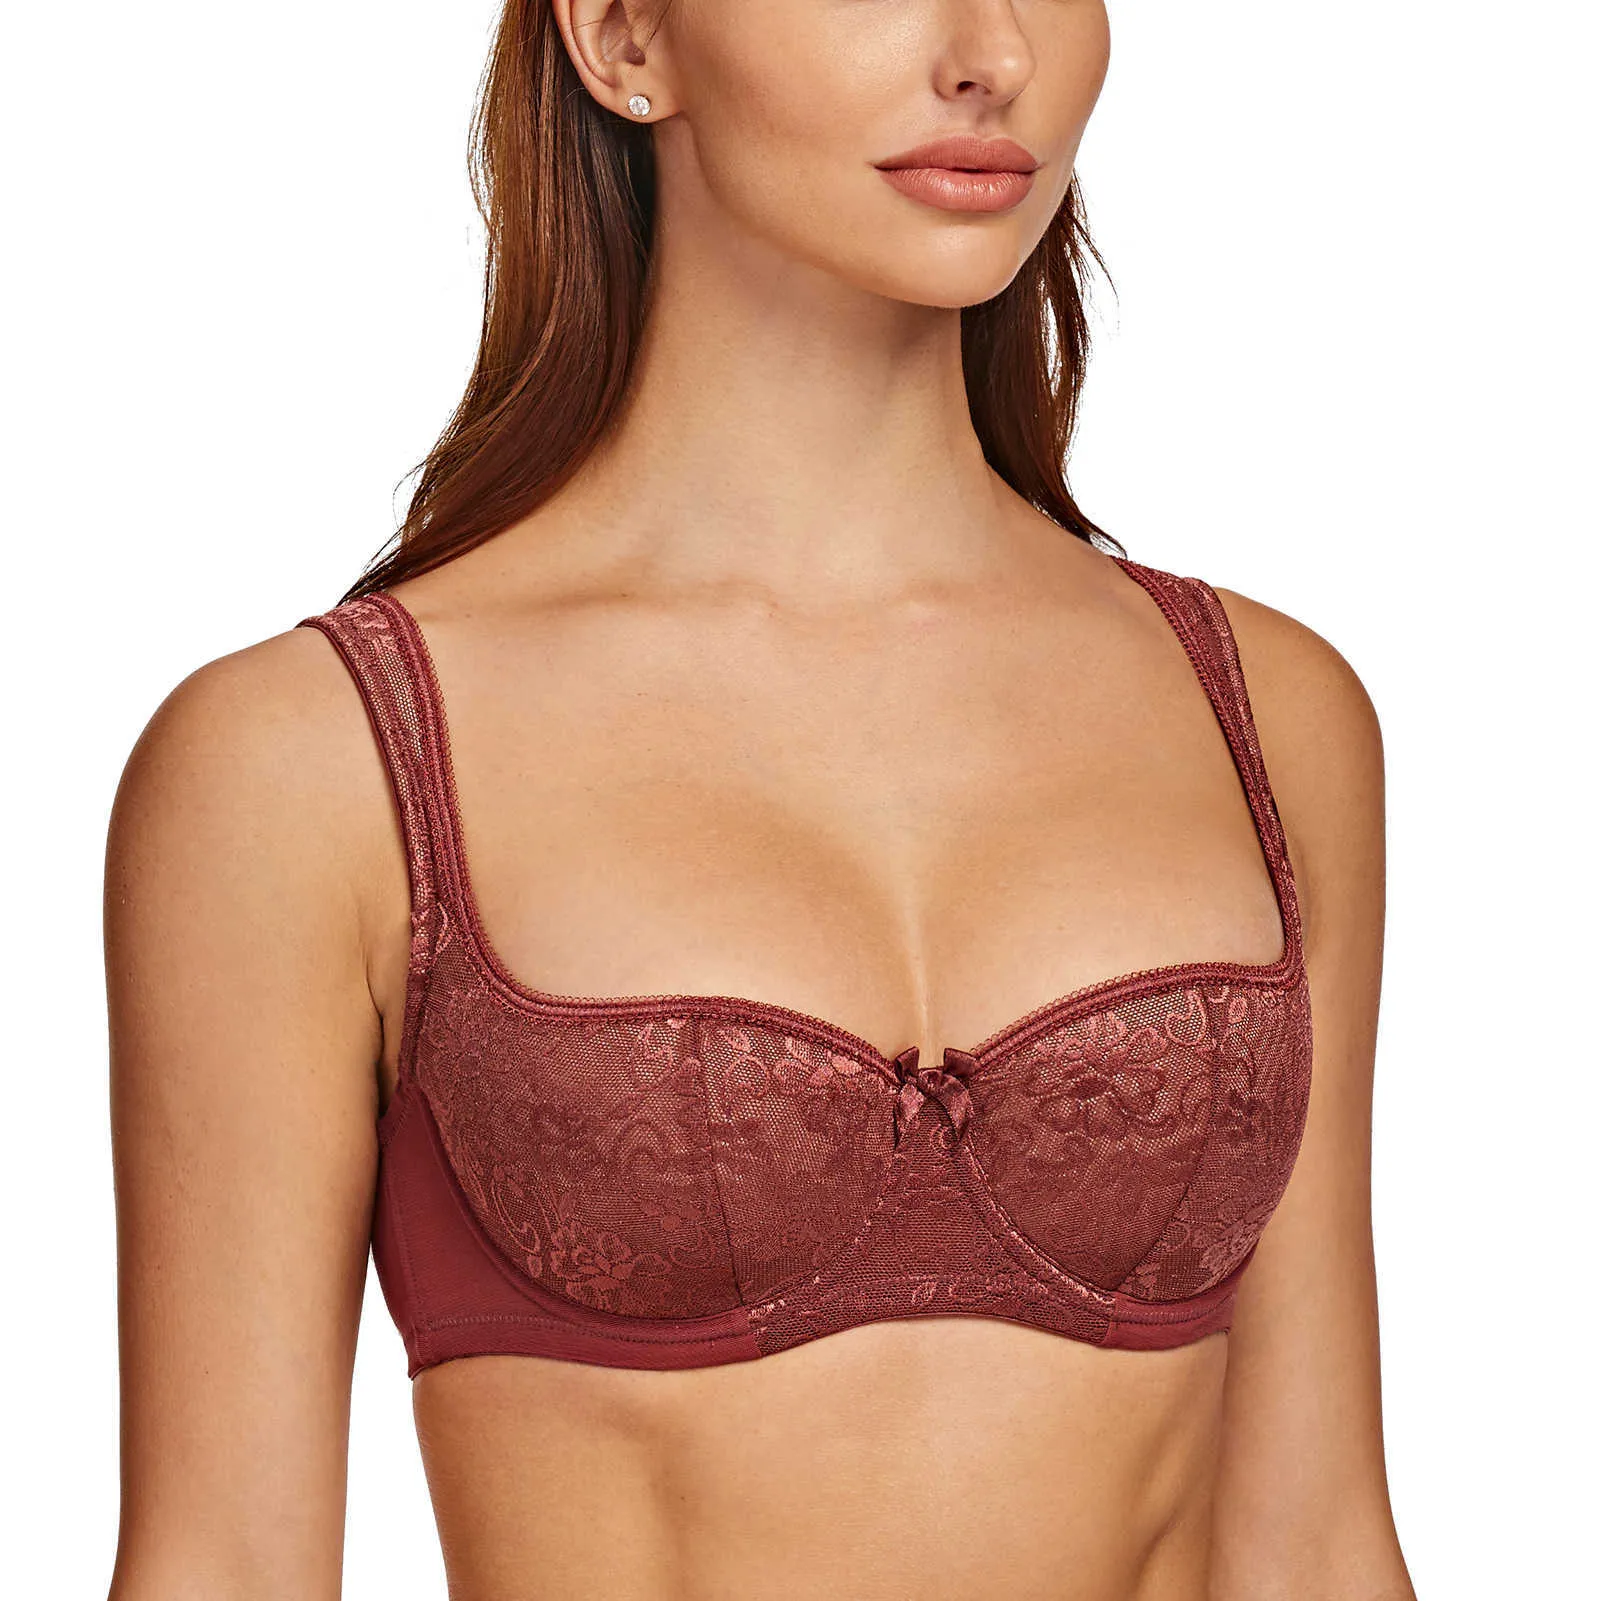 MELENECA Women's Balconette Bra with Padded Strap Half Cup Underwire Sexy Lace 210623